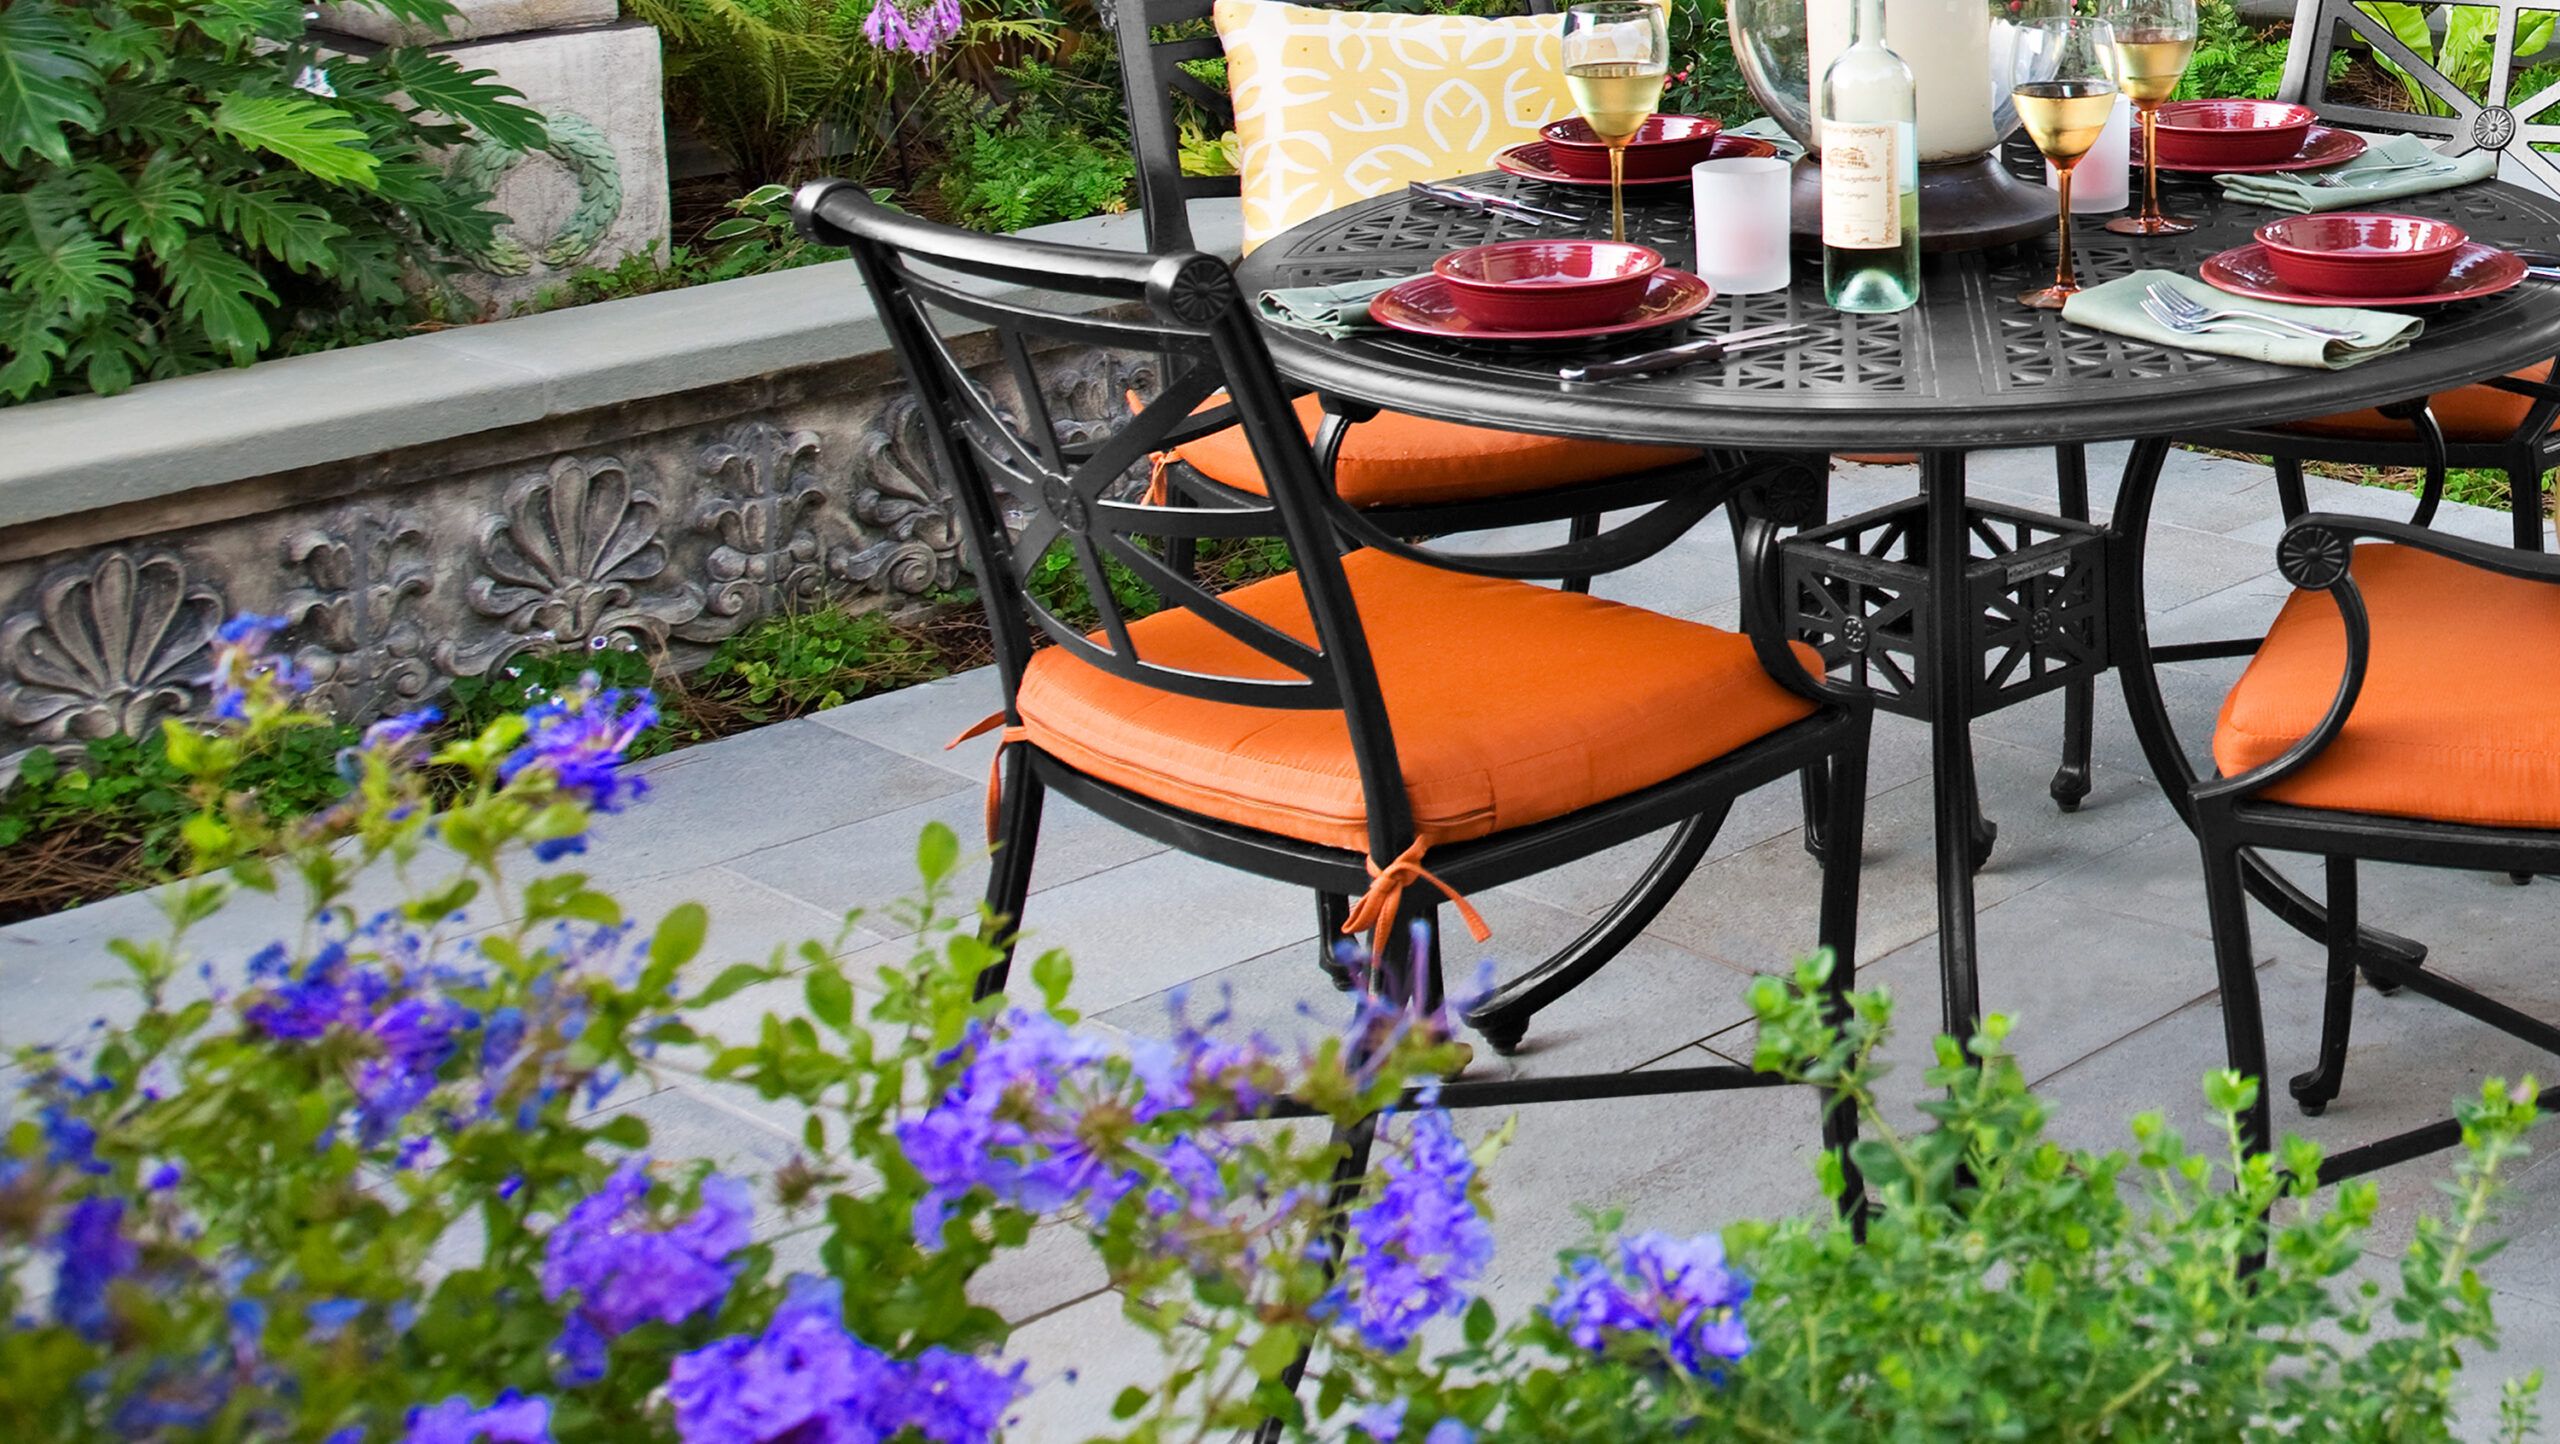 42 Ideas For The Perfect Outdoor Space - This Old House